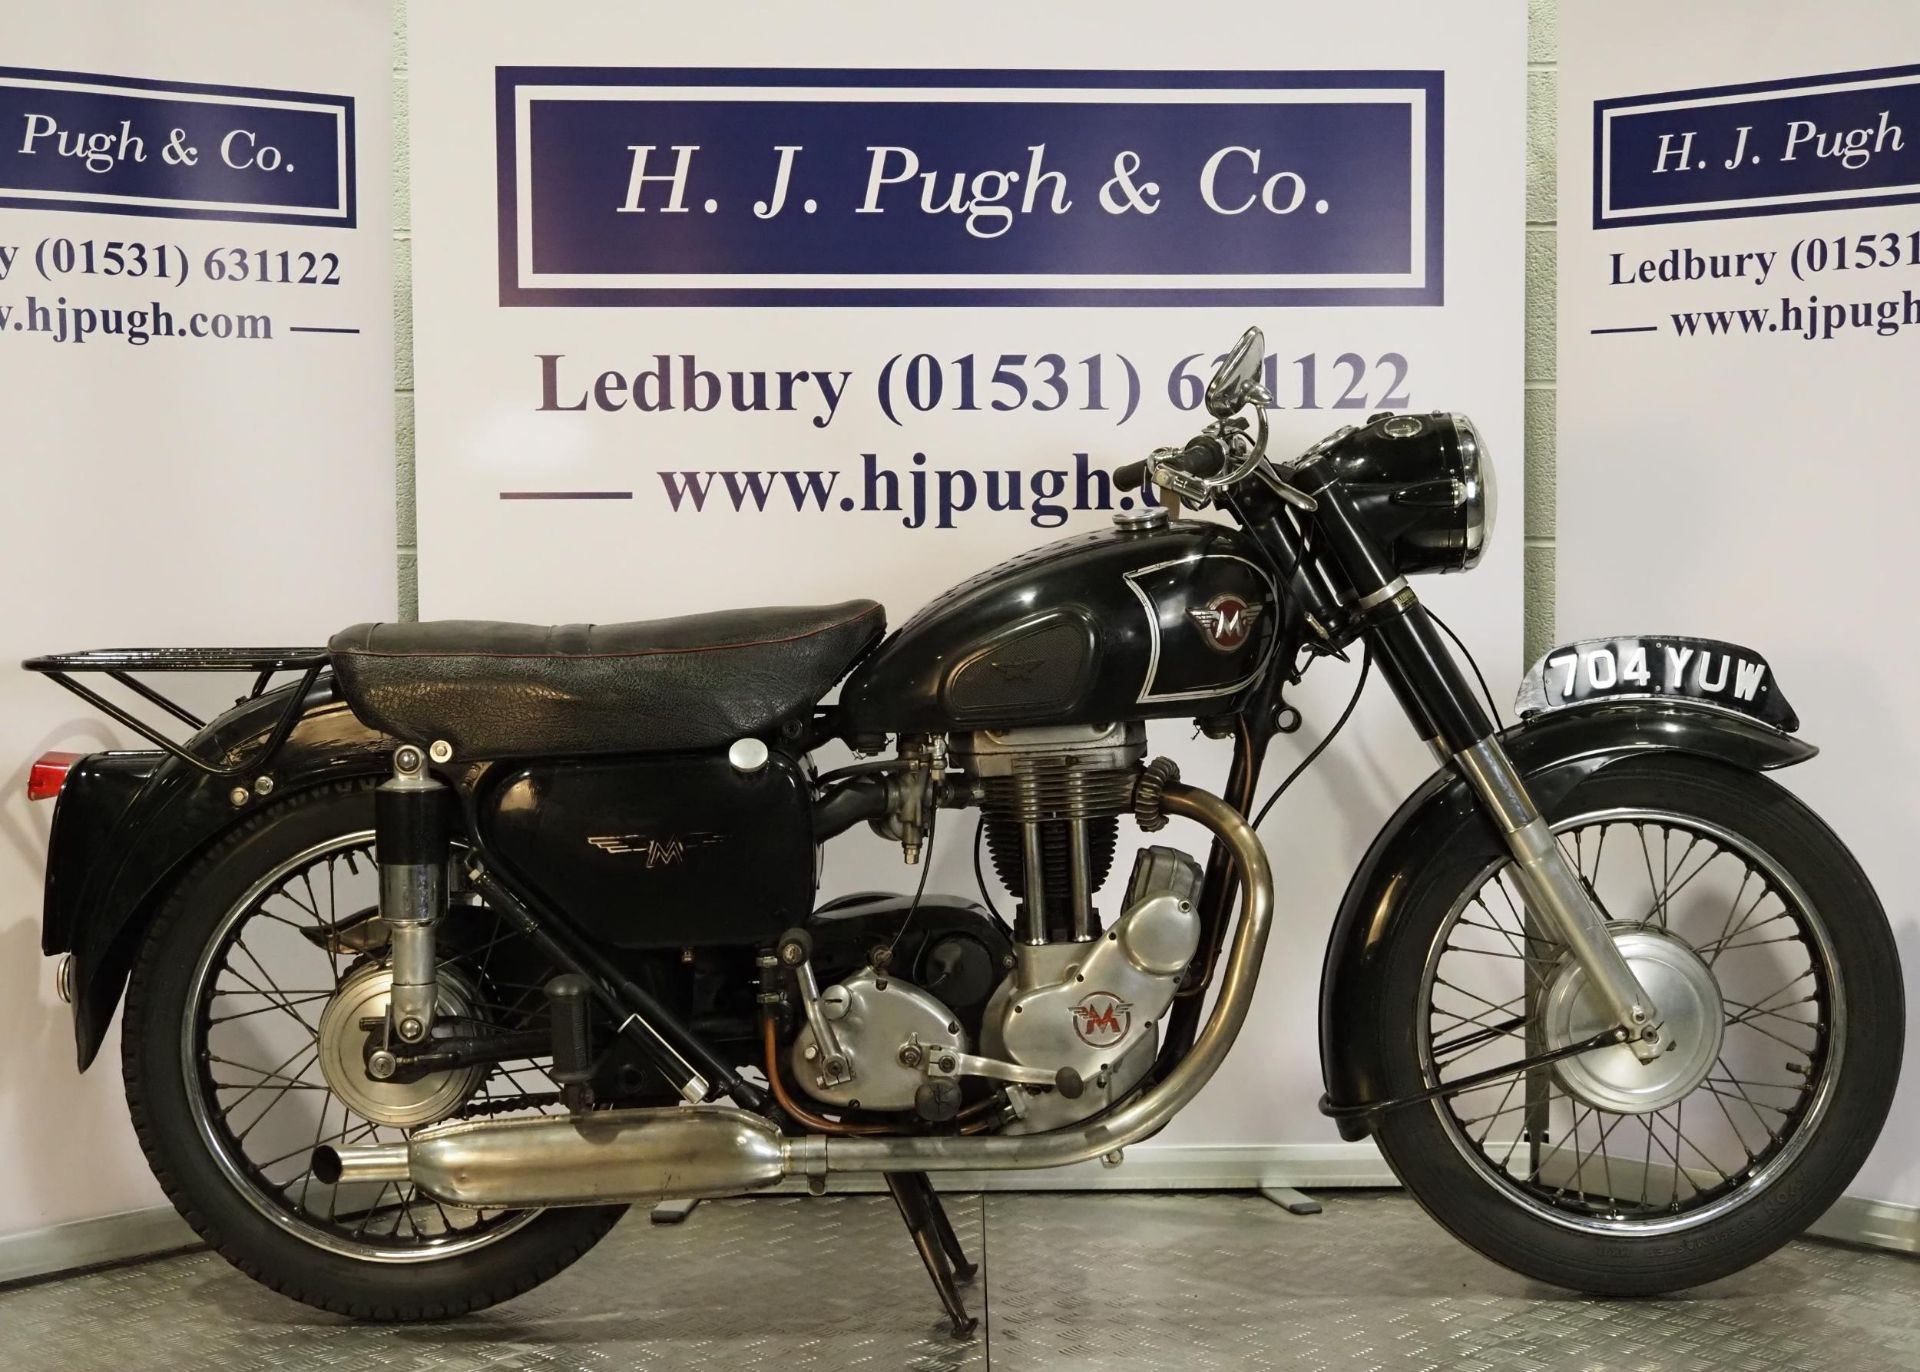 Matchless GL35 motorcycle. 1957. 350cc. Frame No. 01611 Engine No. 56G3LS-31127 Runs and rides. From